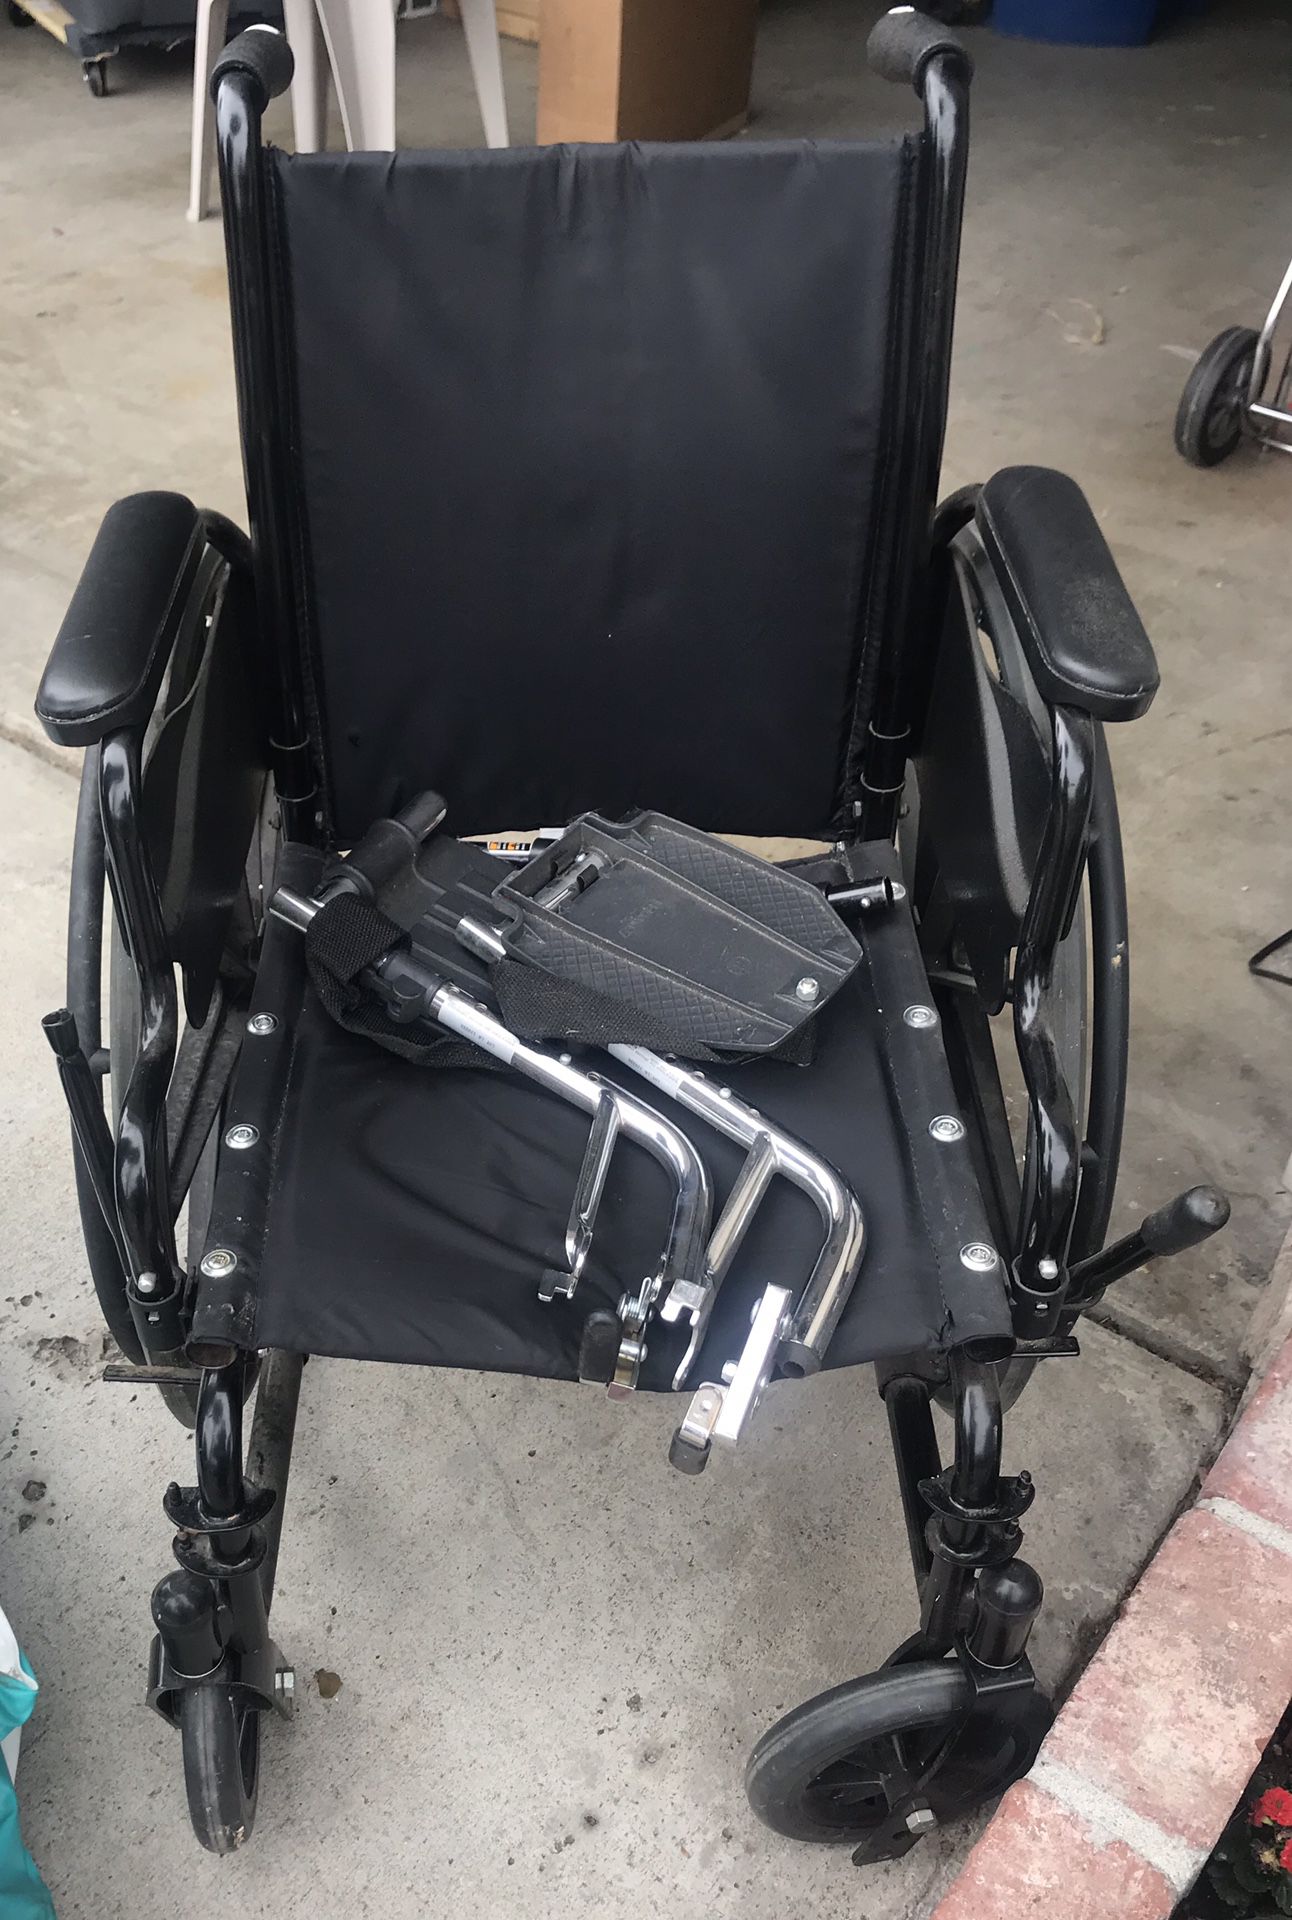 Wheel chair good conditions $50